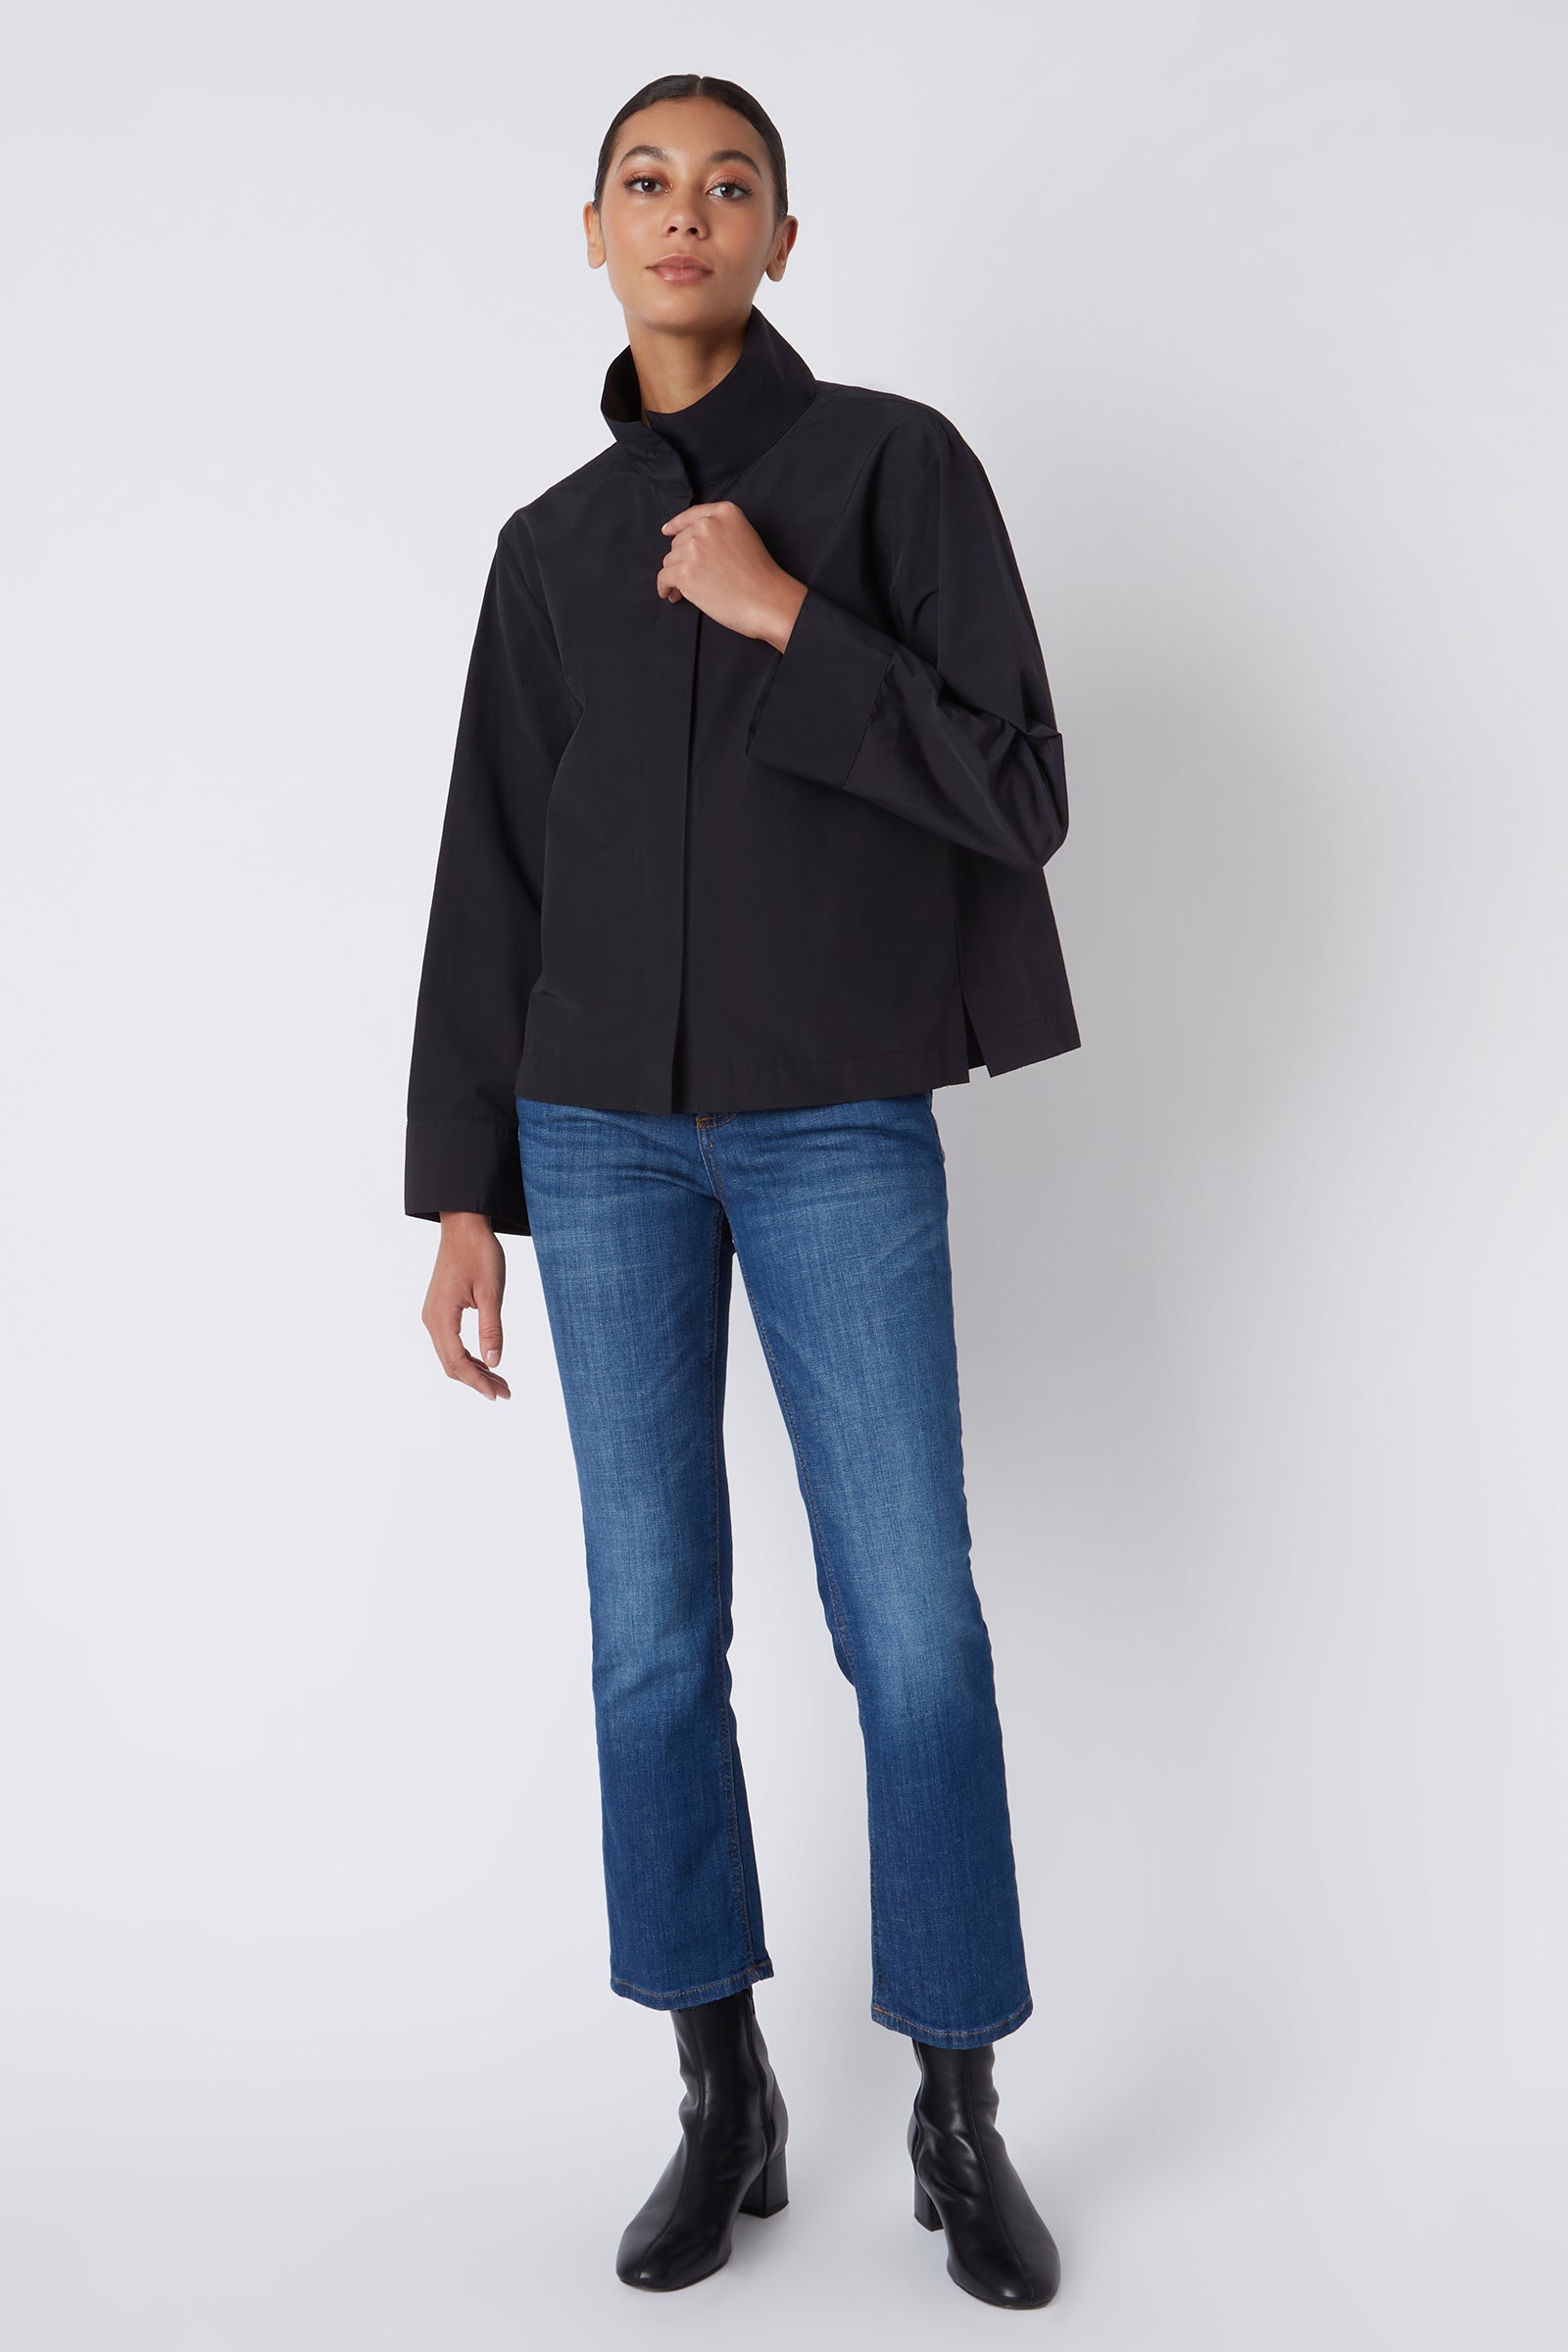 Kal Rieman Peggy Collared Shirt in Black on Model Main Full Front View